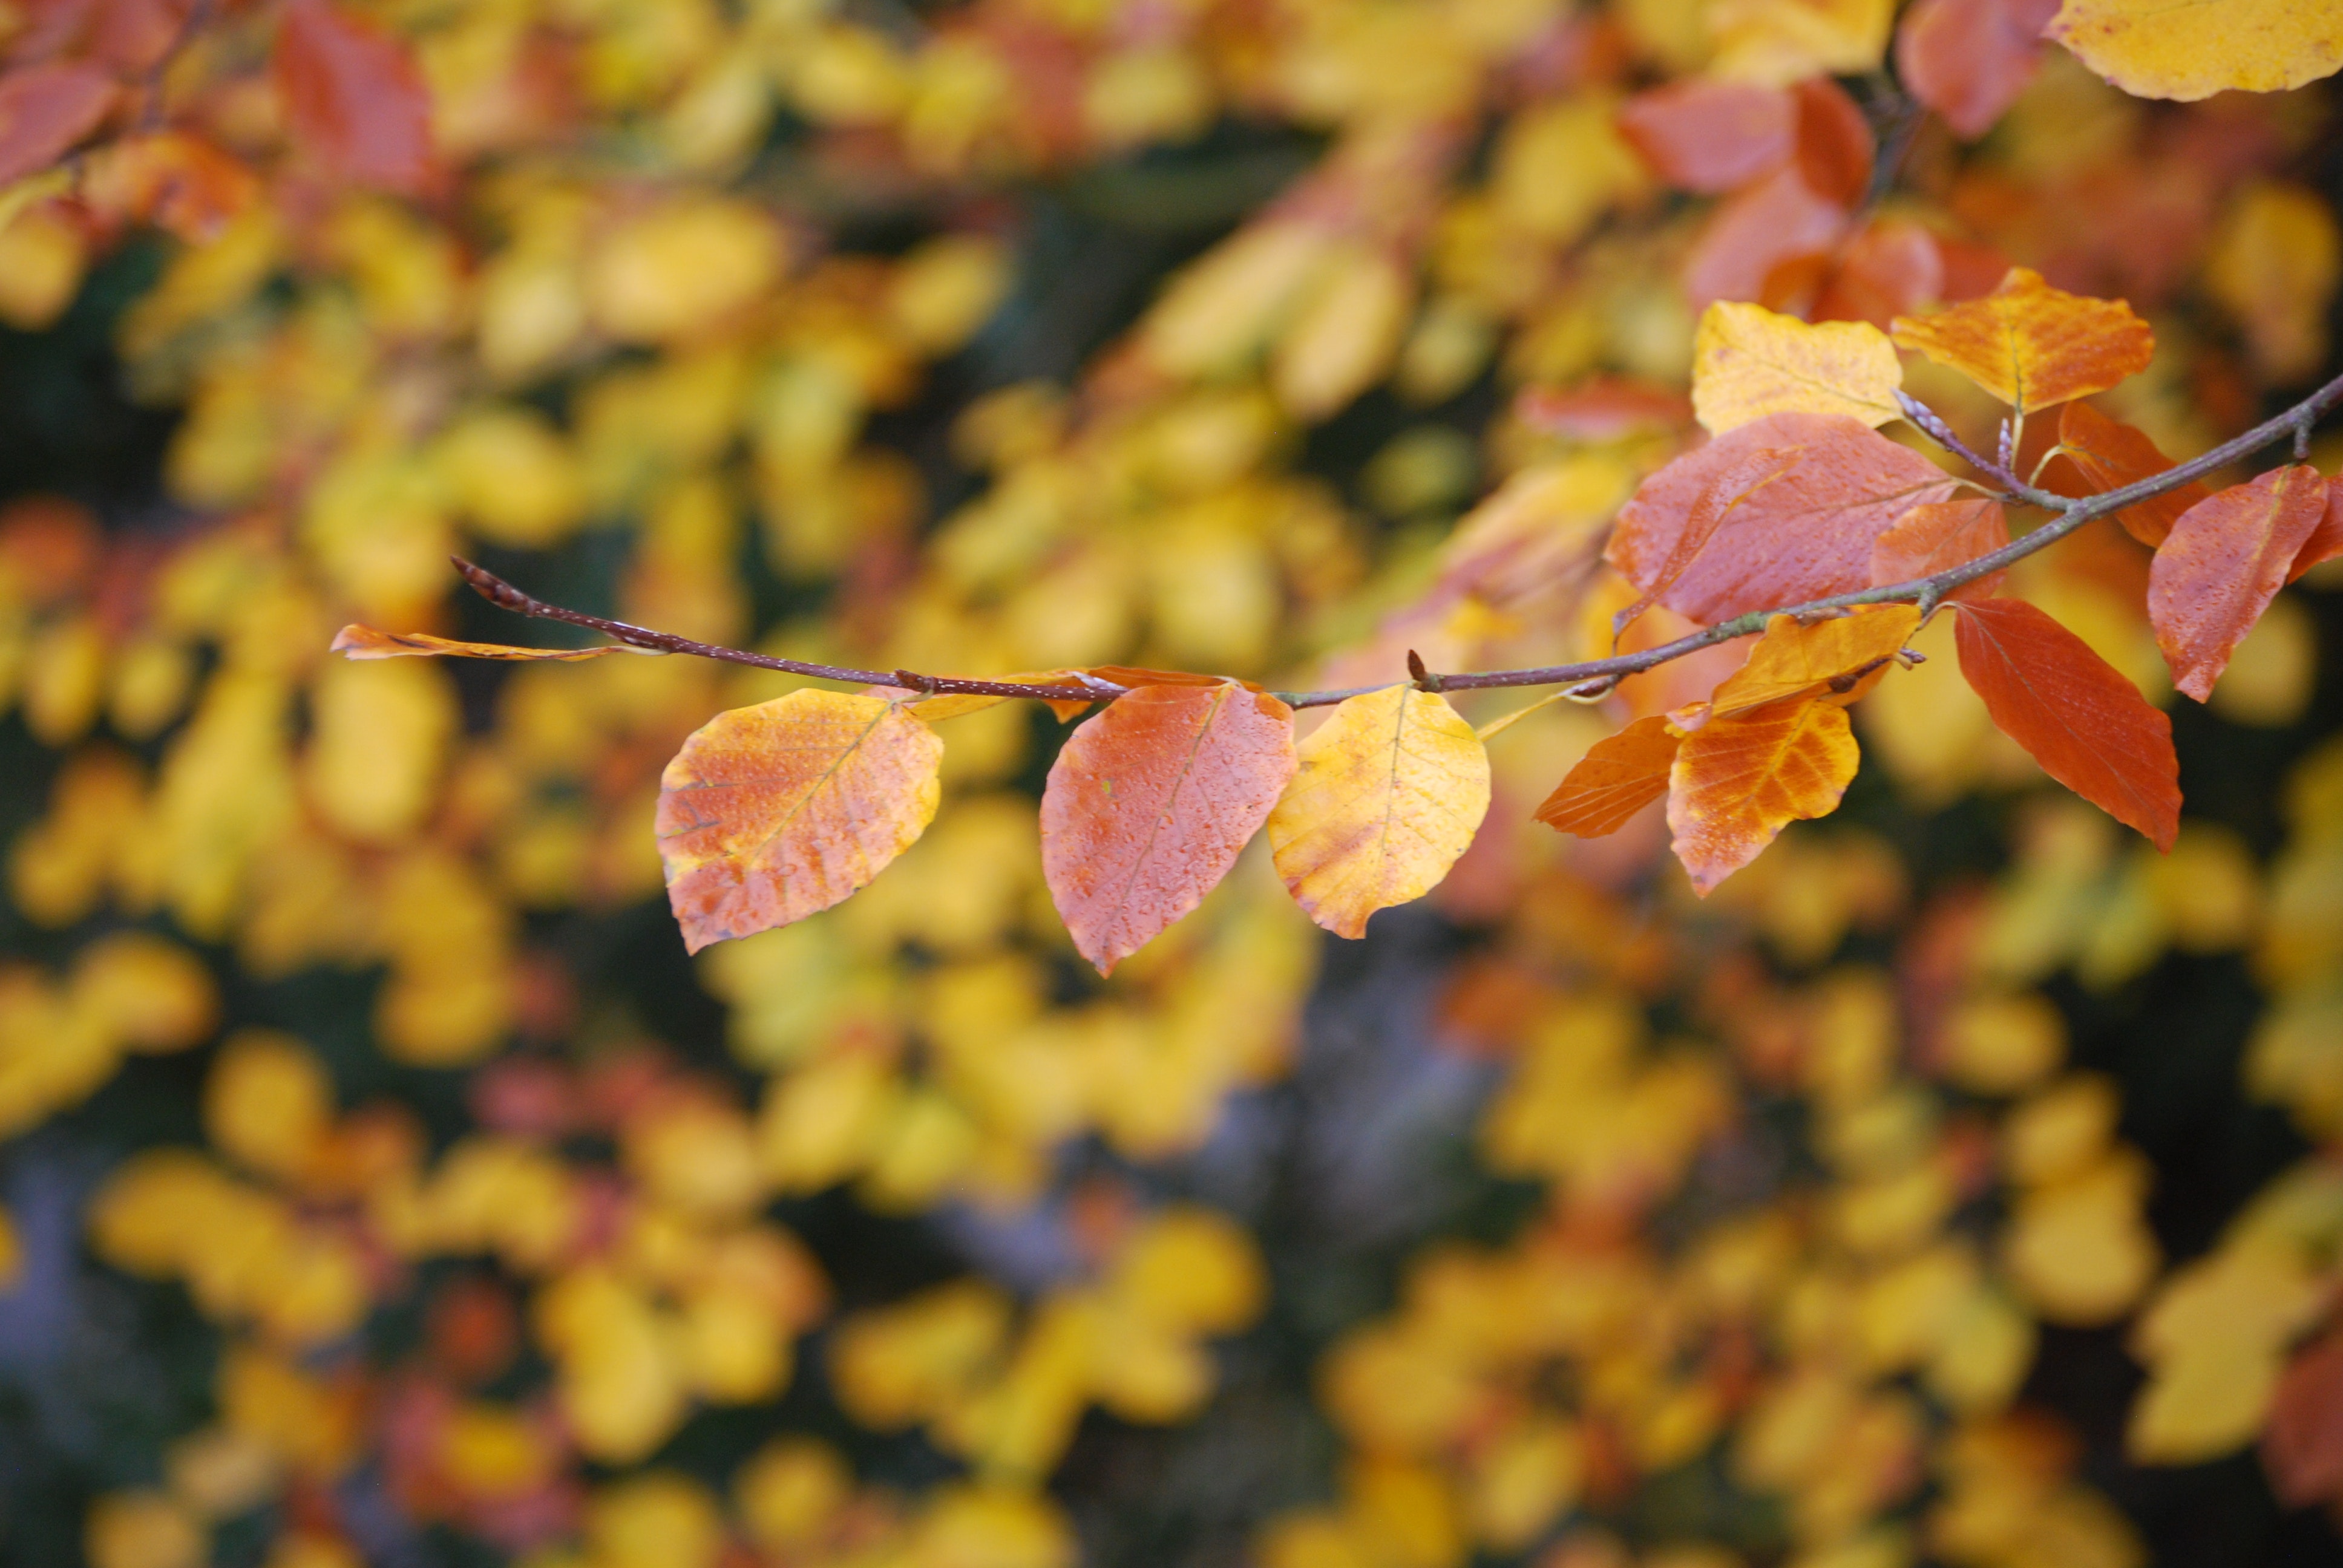 Brown and Yellow Leaves on Focus Photo, Autumn, Wood, Vibrant, Tree, HQ Photo